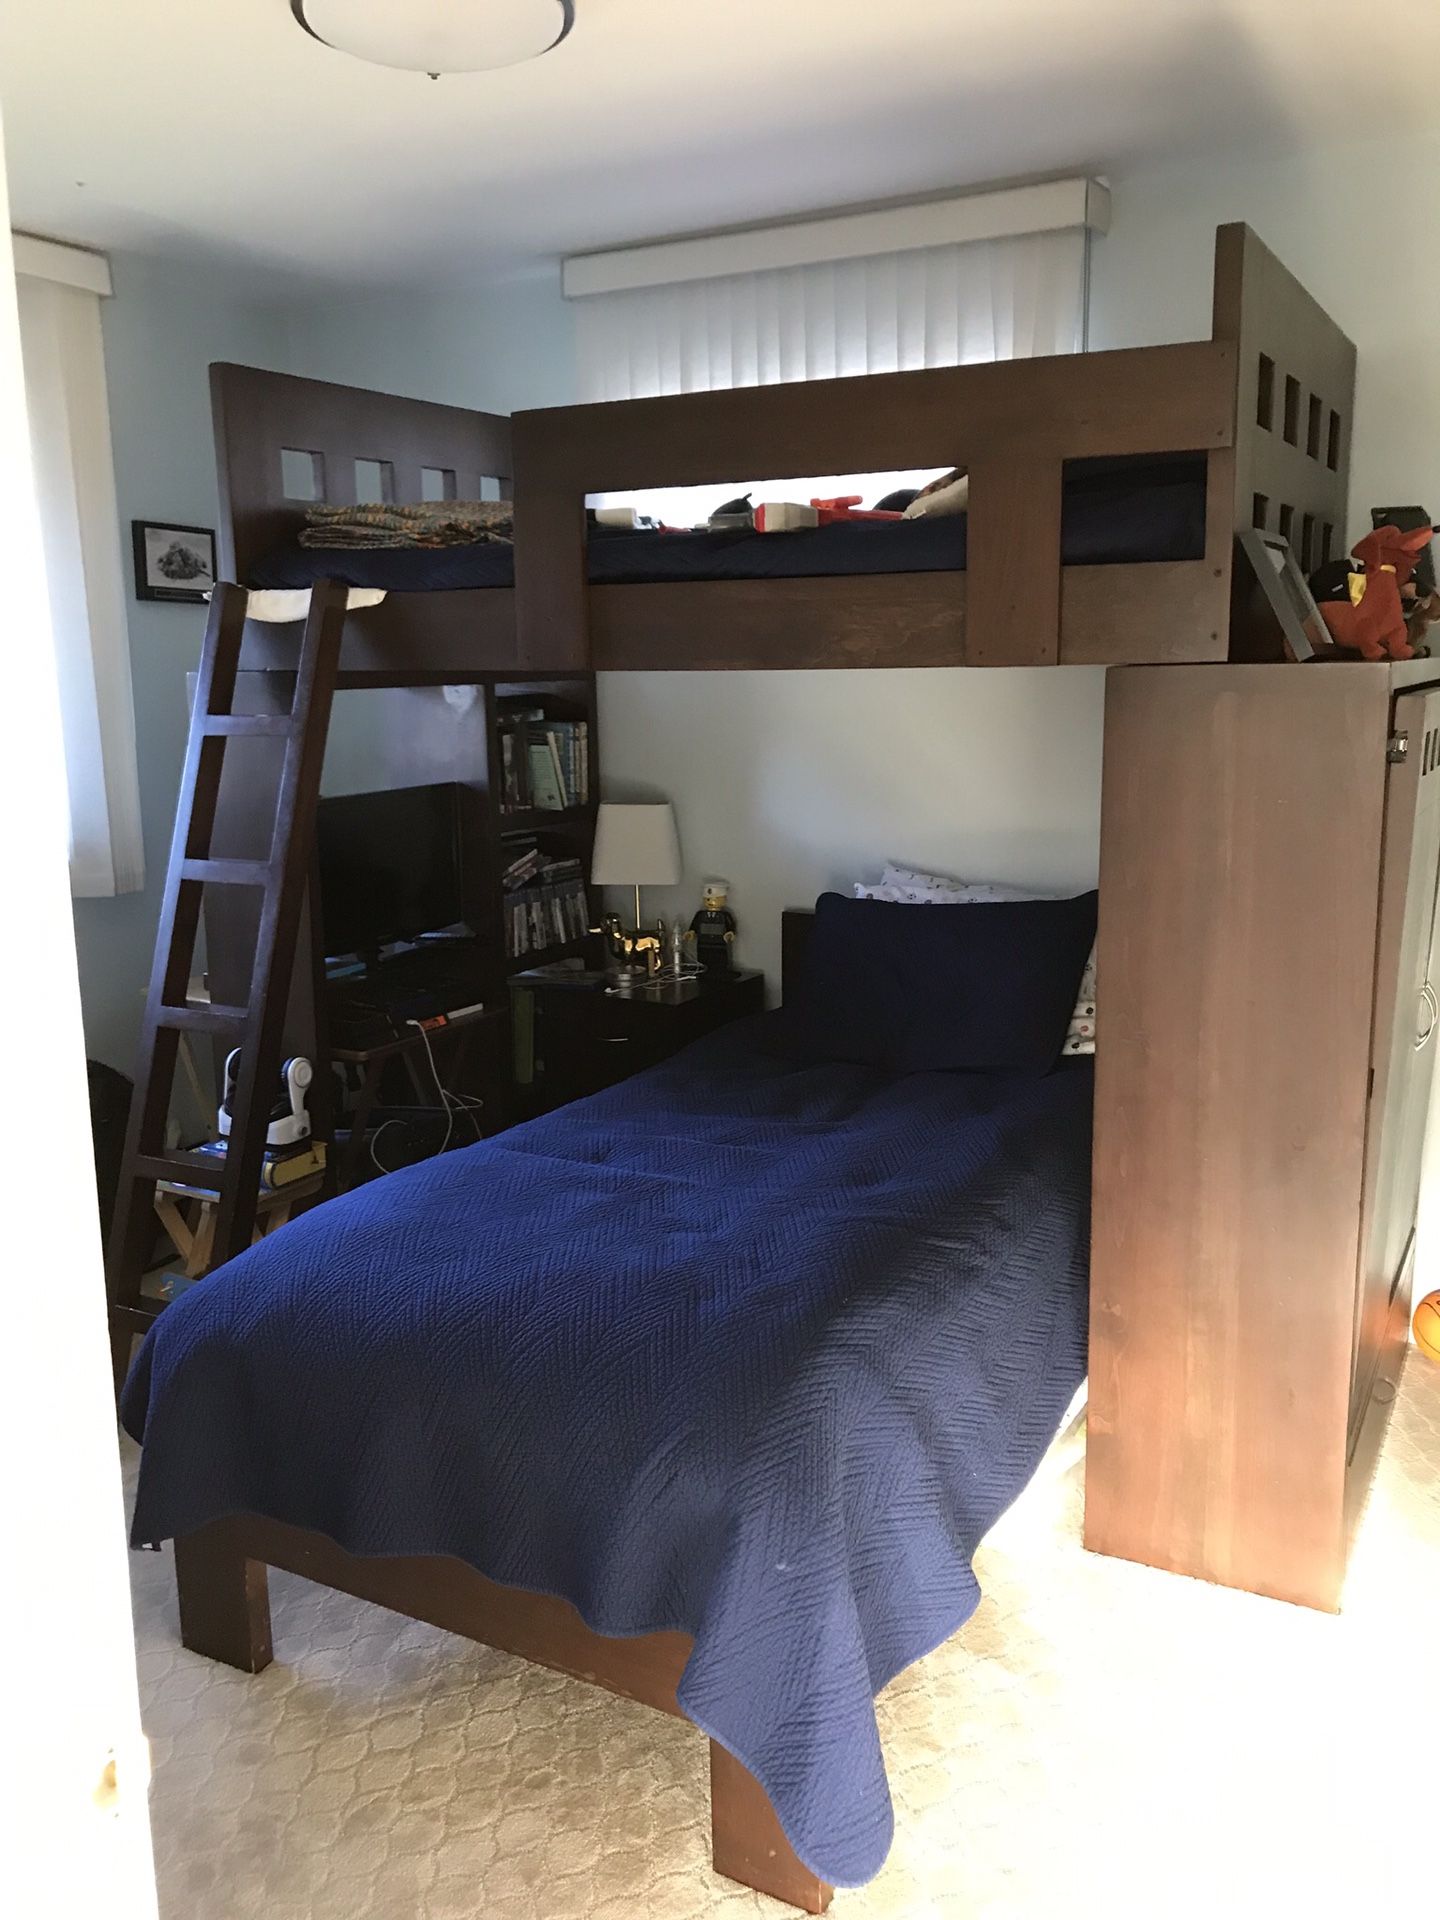 Bunk beds armoire and two desks / solid wood